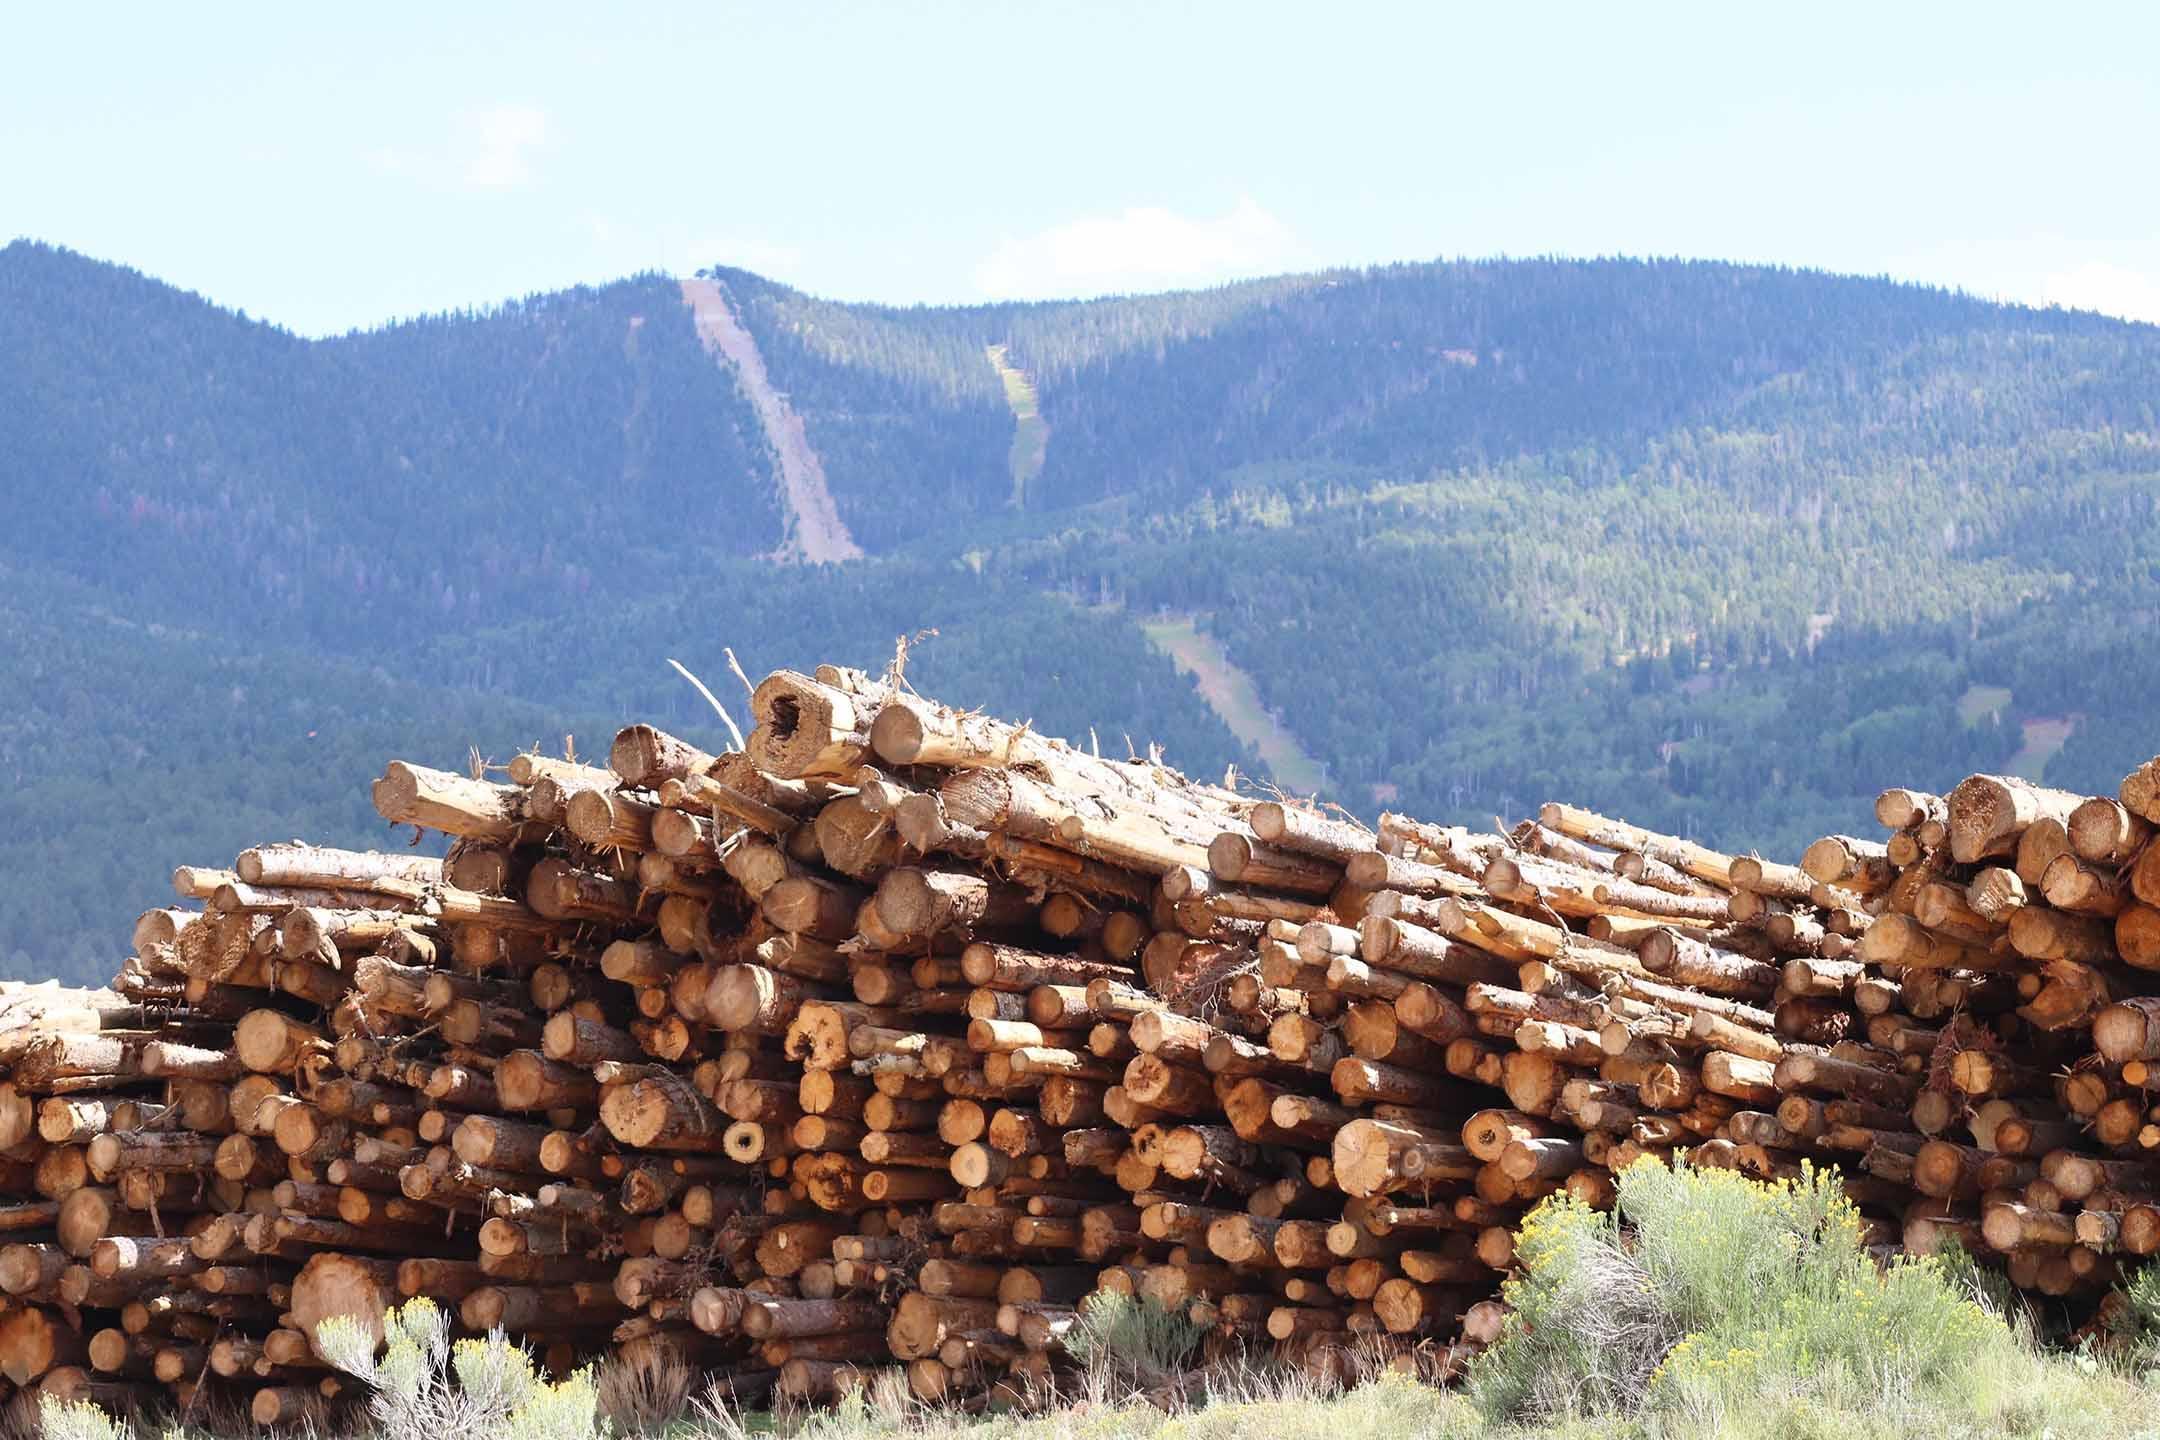 Neatly stack decks of logs extend across the foreground. In the background a bulldozer line scrapes  up a slope of thick pine.